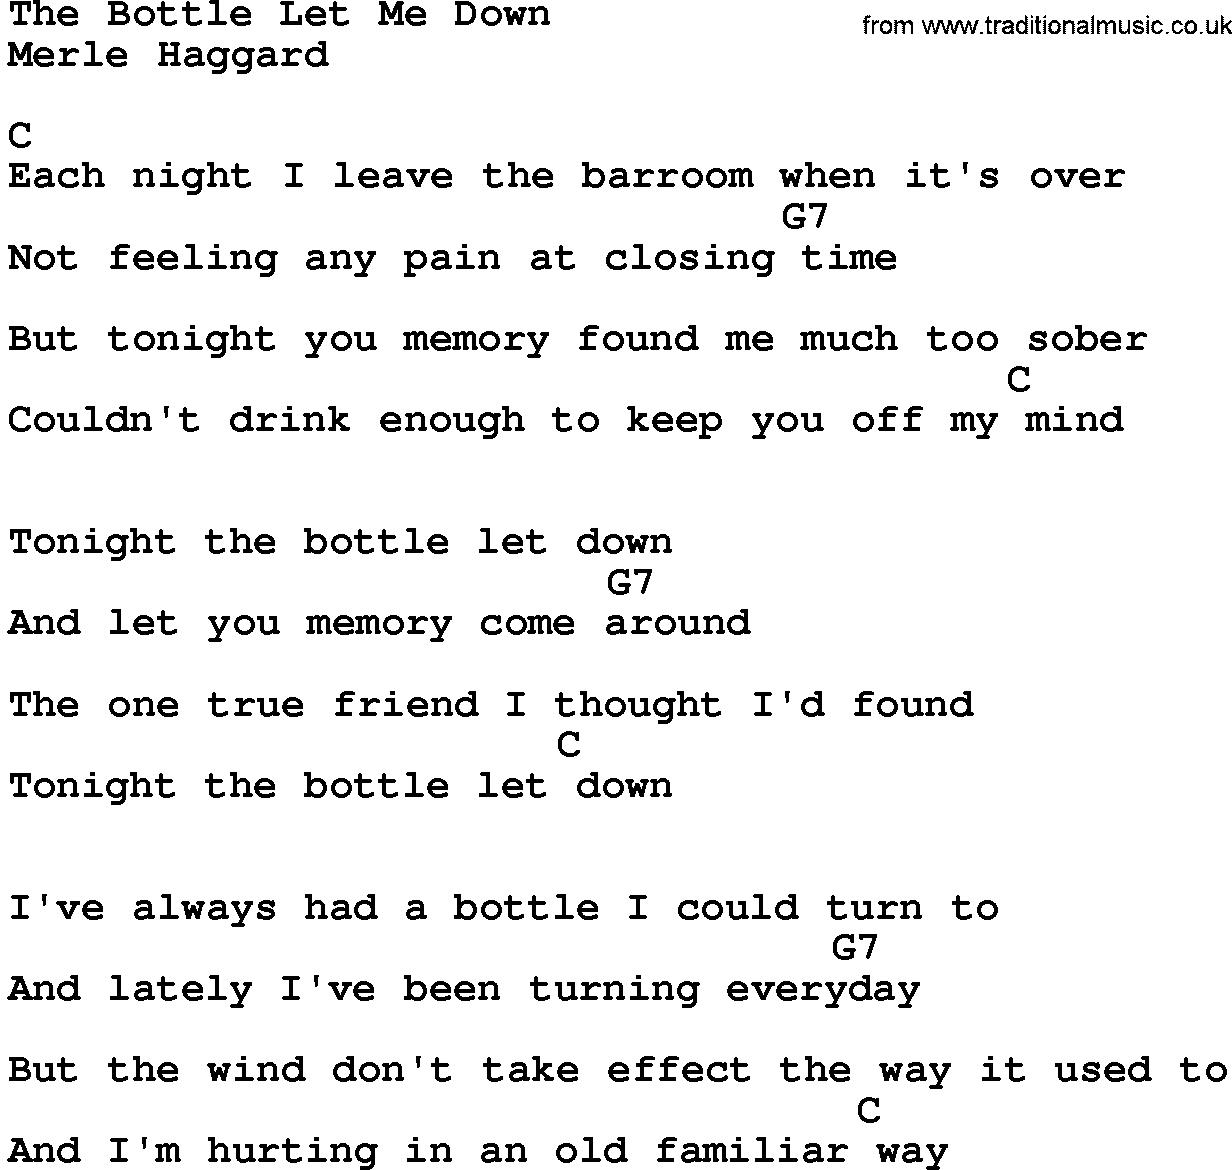 Country music song: The Bottle Let Me Down lyrics and chords